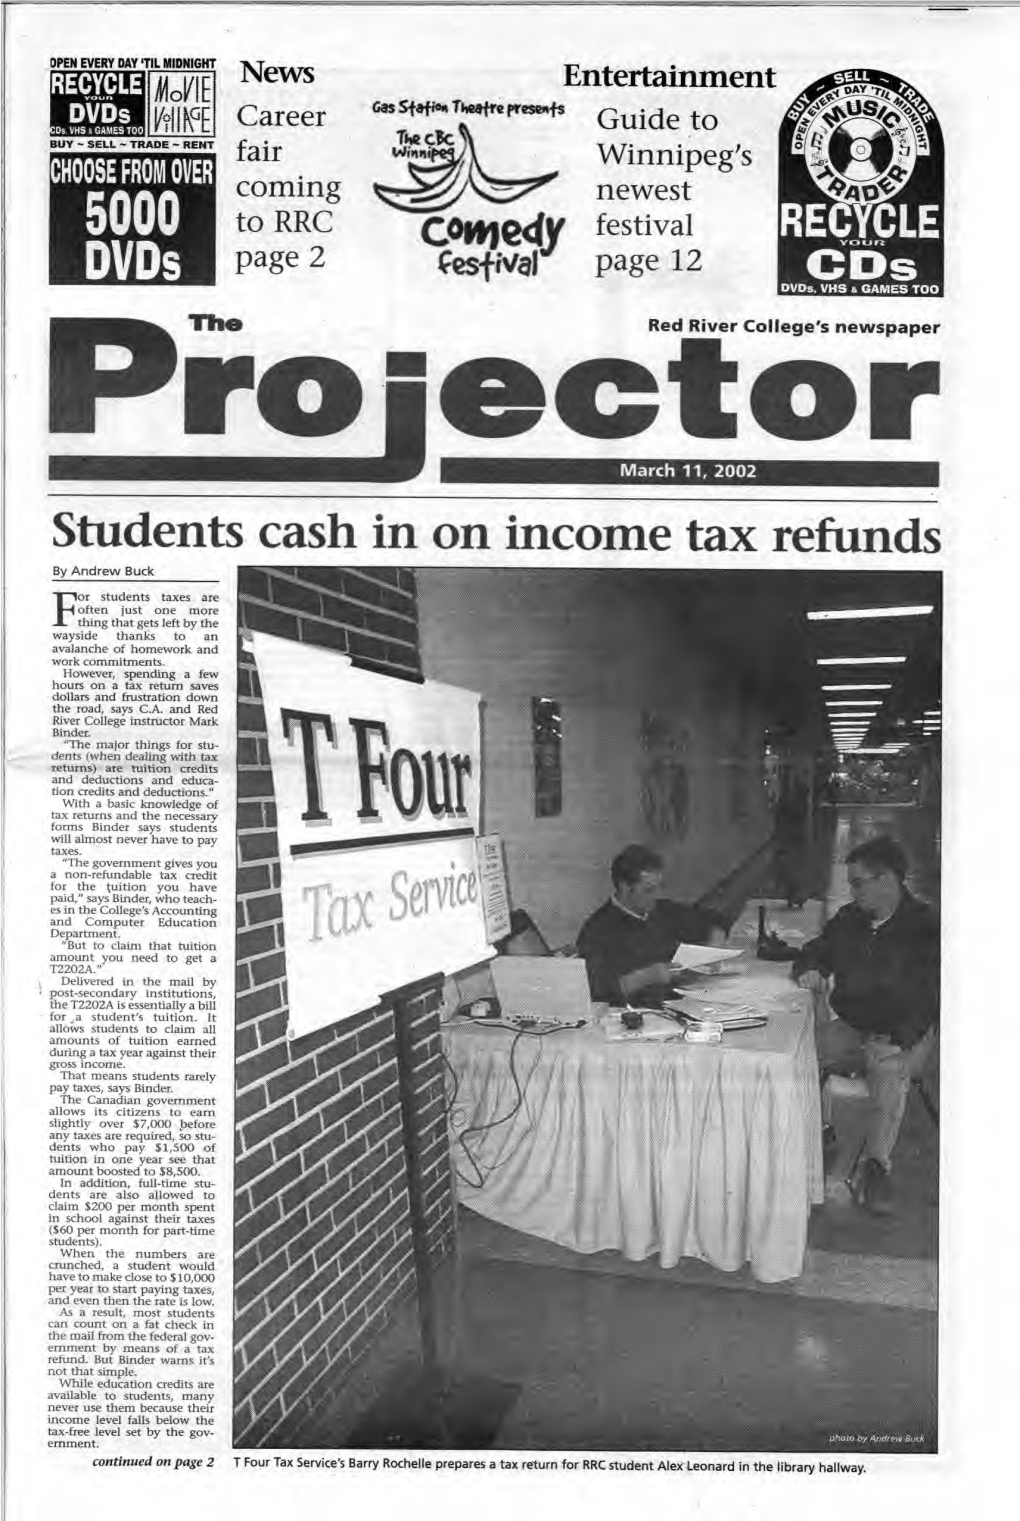 Students Cash in on Income Tax Refunds by Andrew Buck